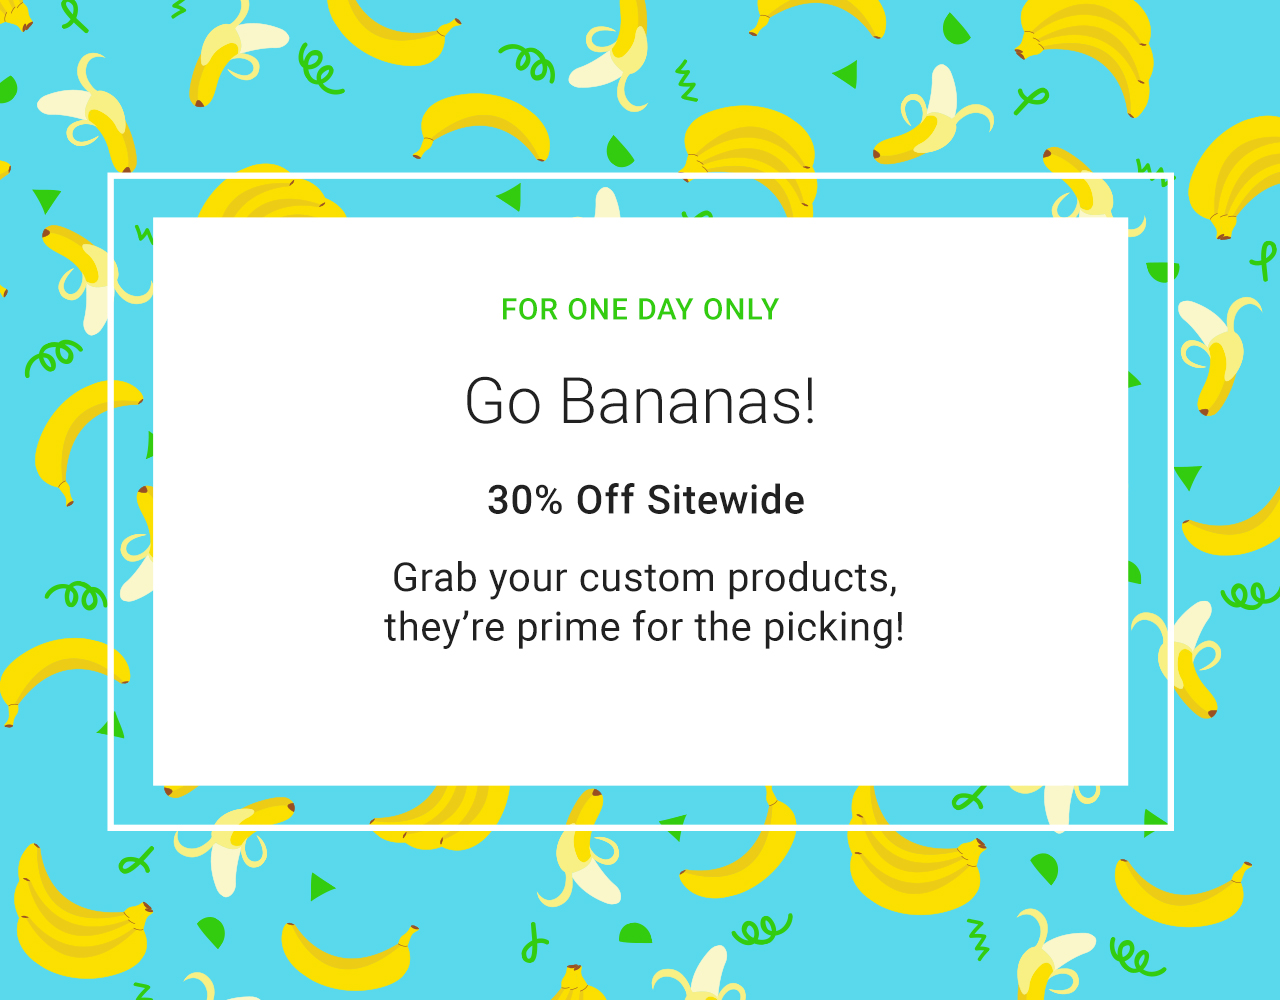 Go Bananas! Save with 30% Off Sitewide - USE CODE: THIRTYONEDAY - Ends at Midnight!!